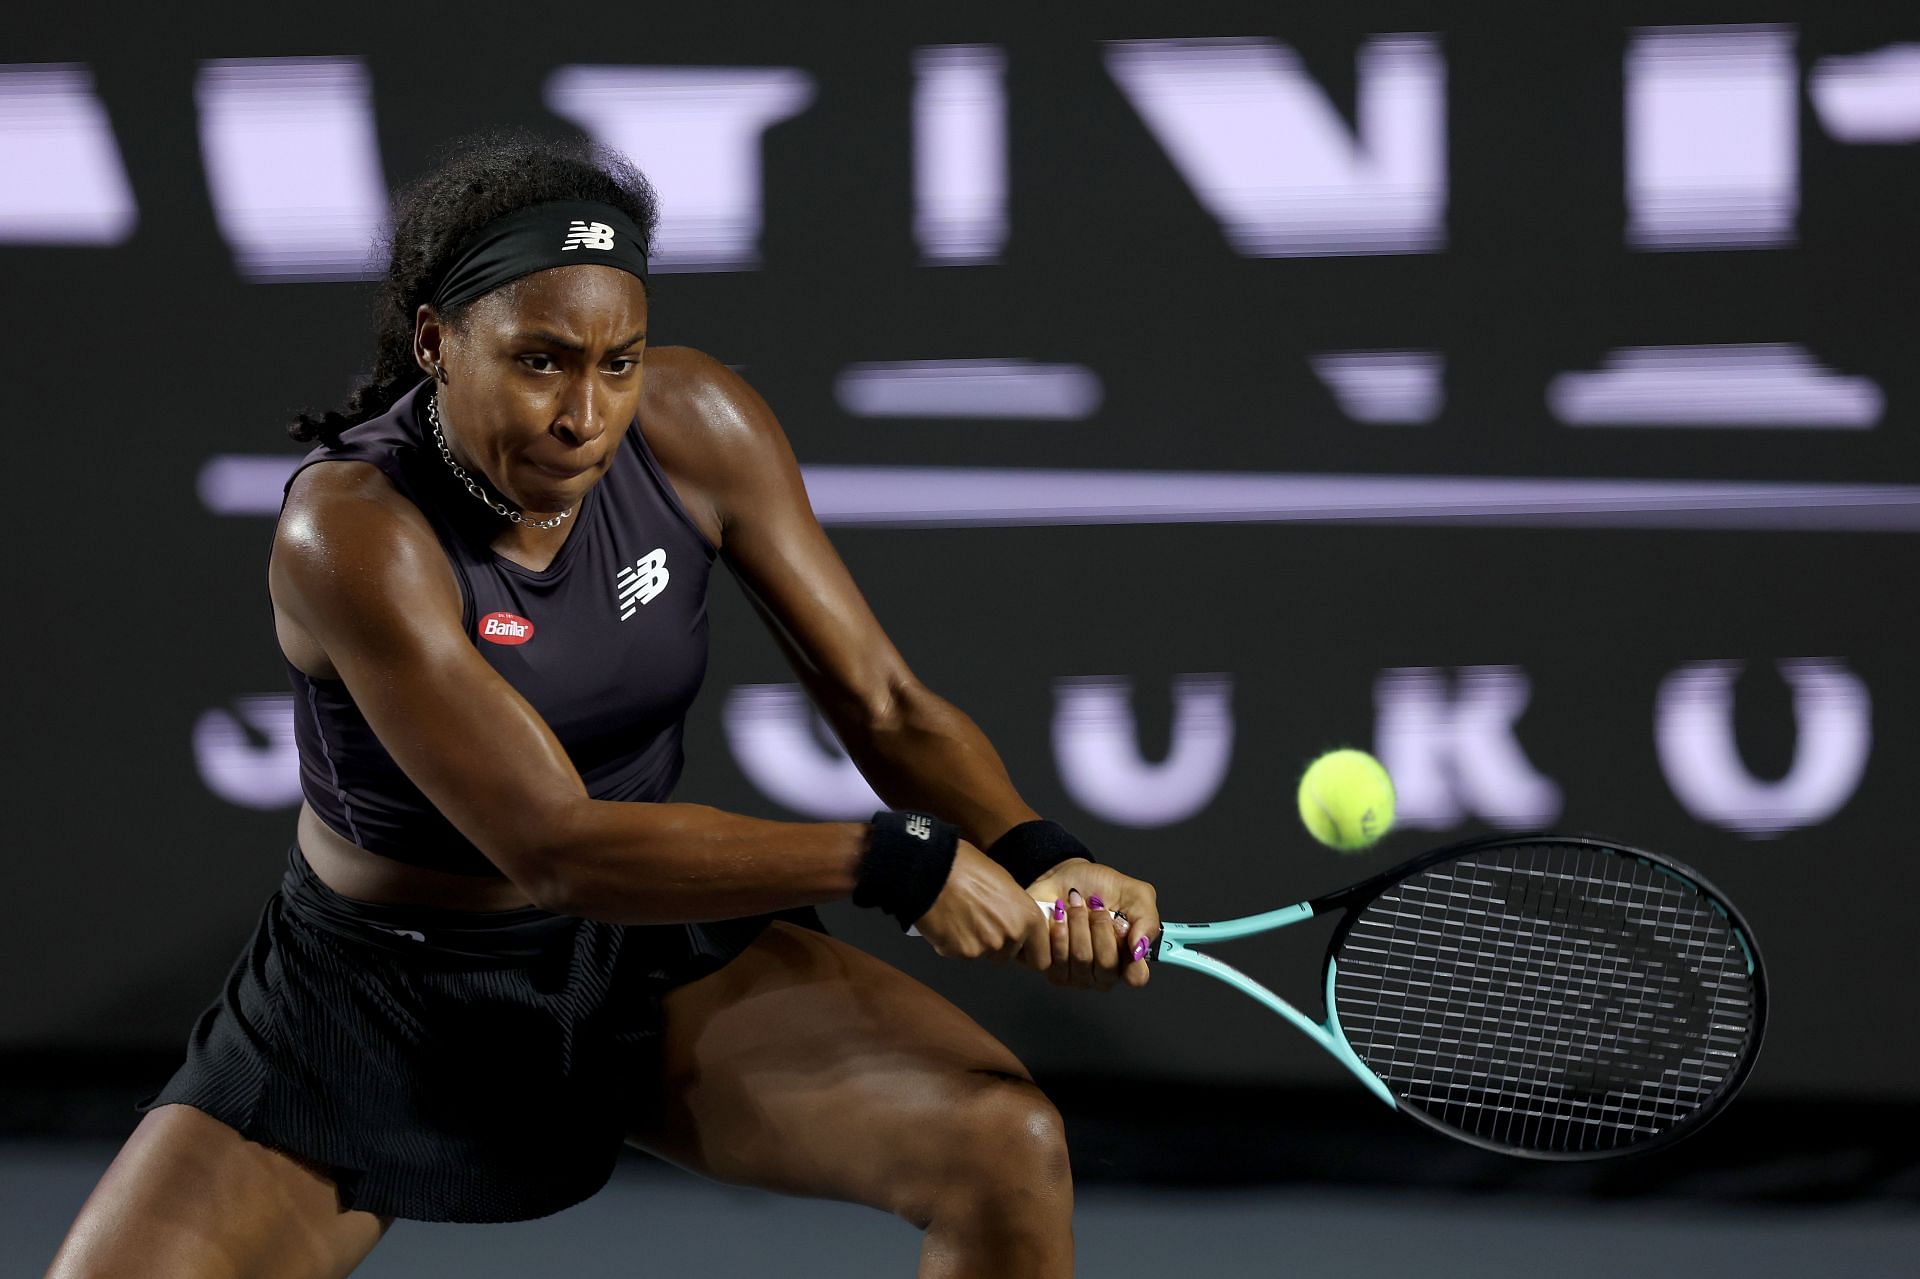 Photos of Coco Gauff on Day 2 of the 2023 WTA Finals